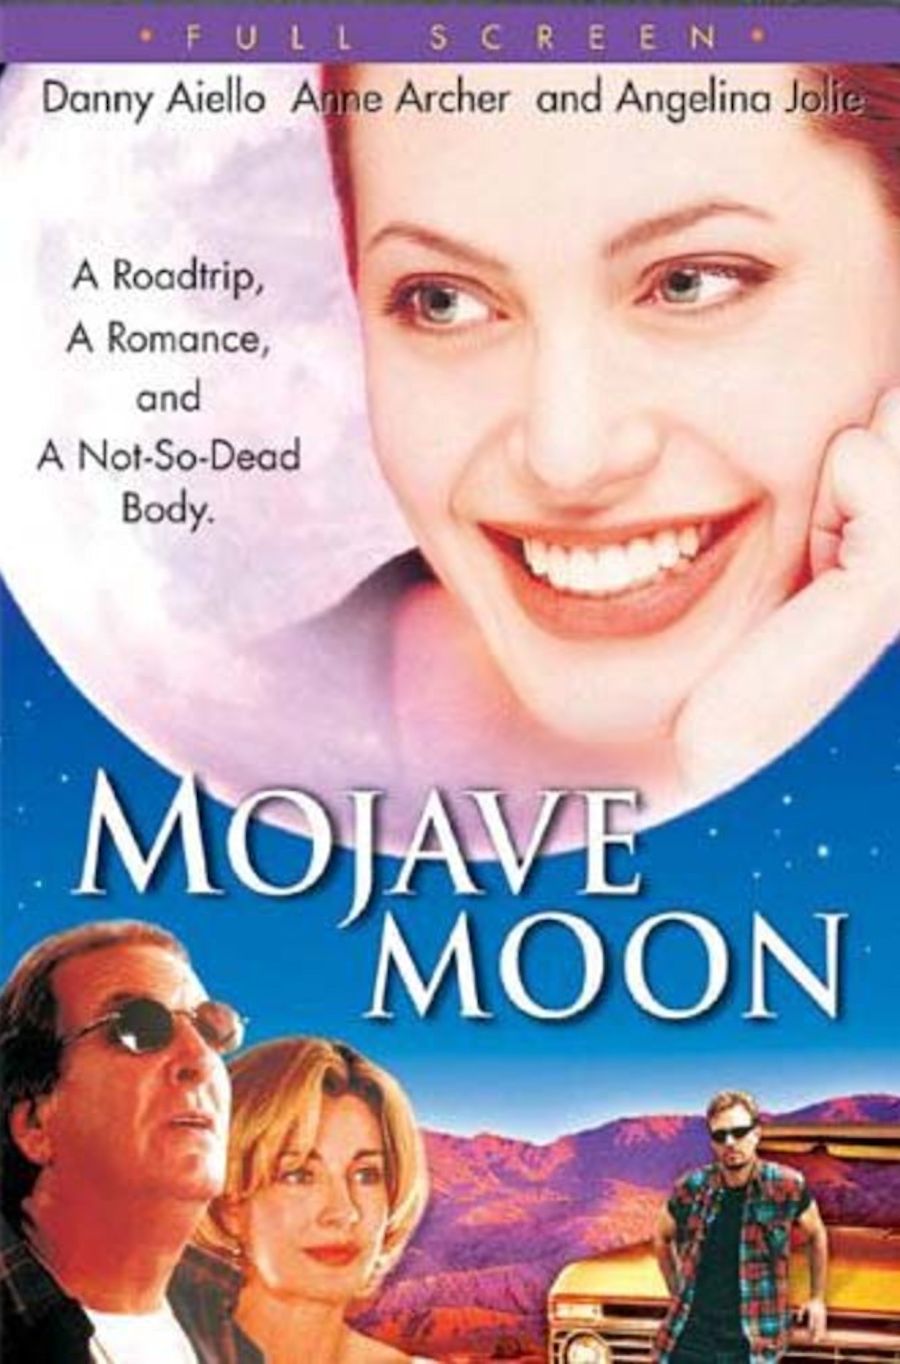 Mojave Moon - French Cover
Keywords: ;media_cover